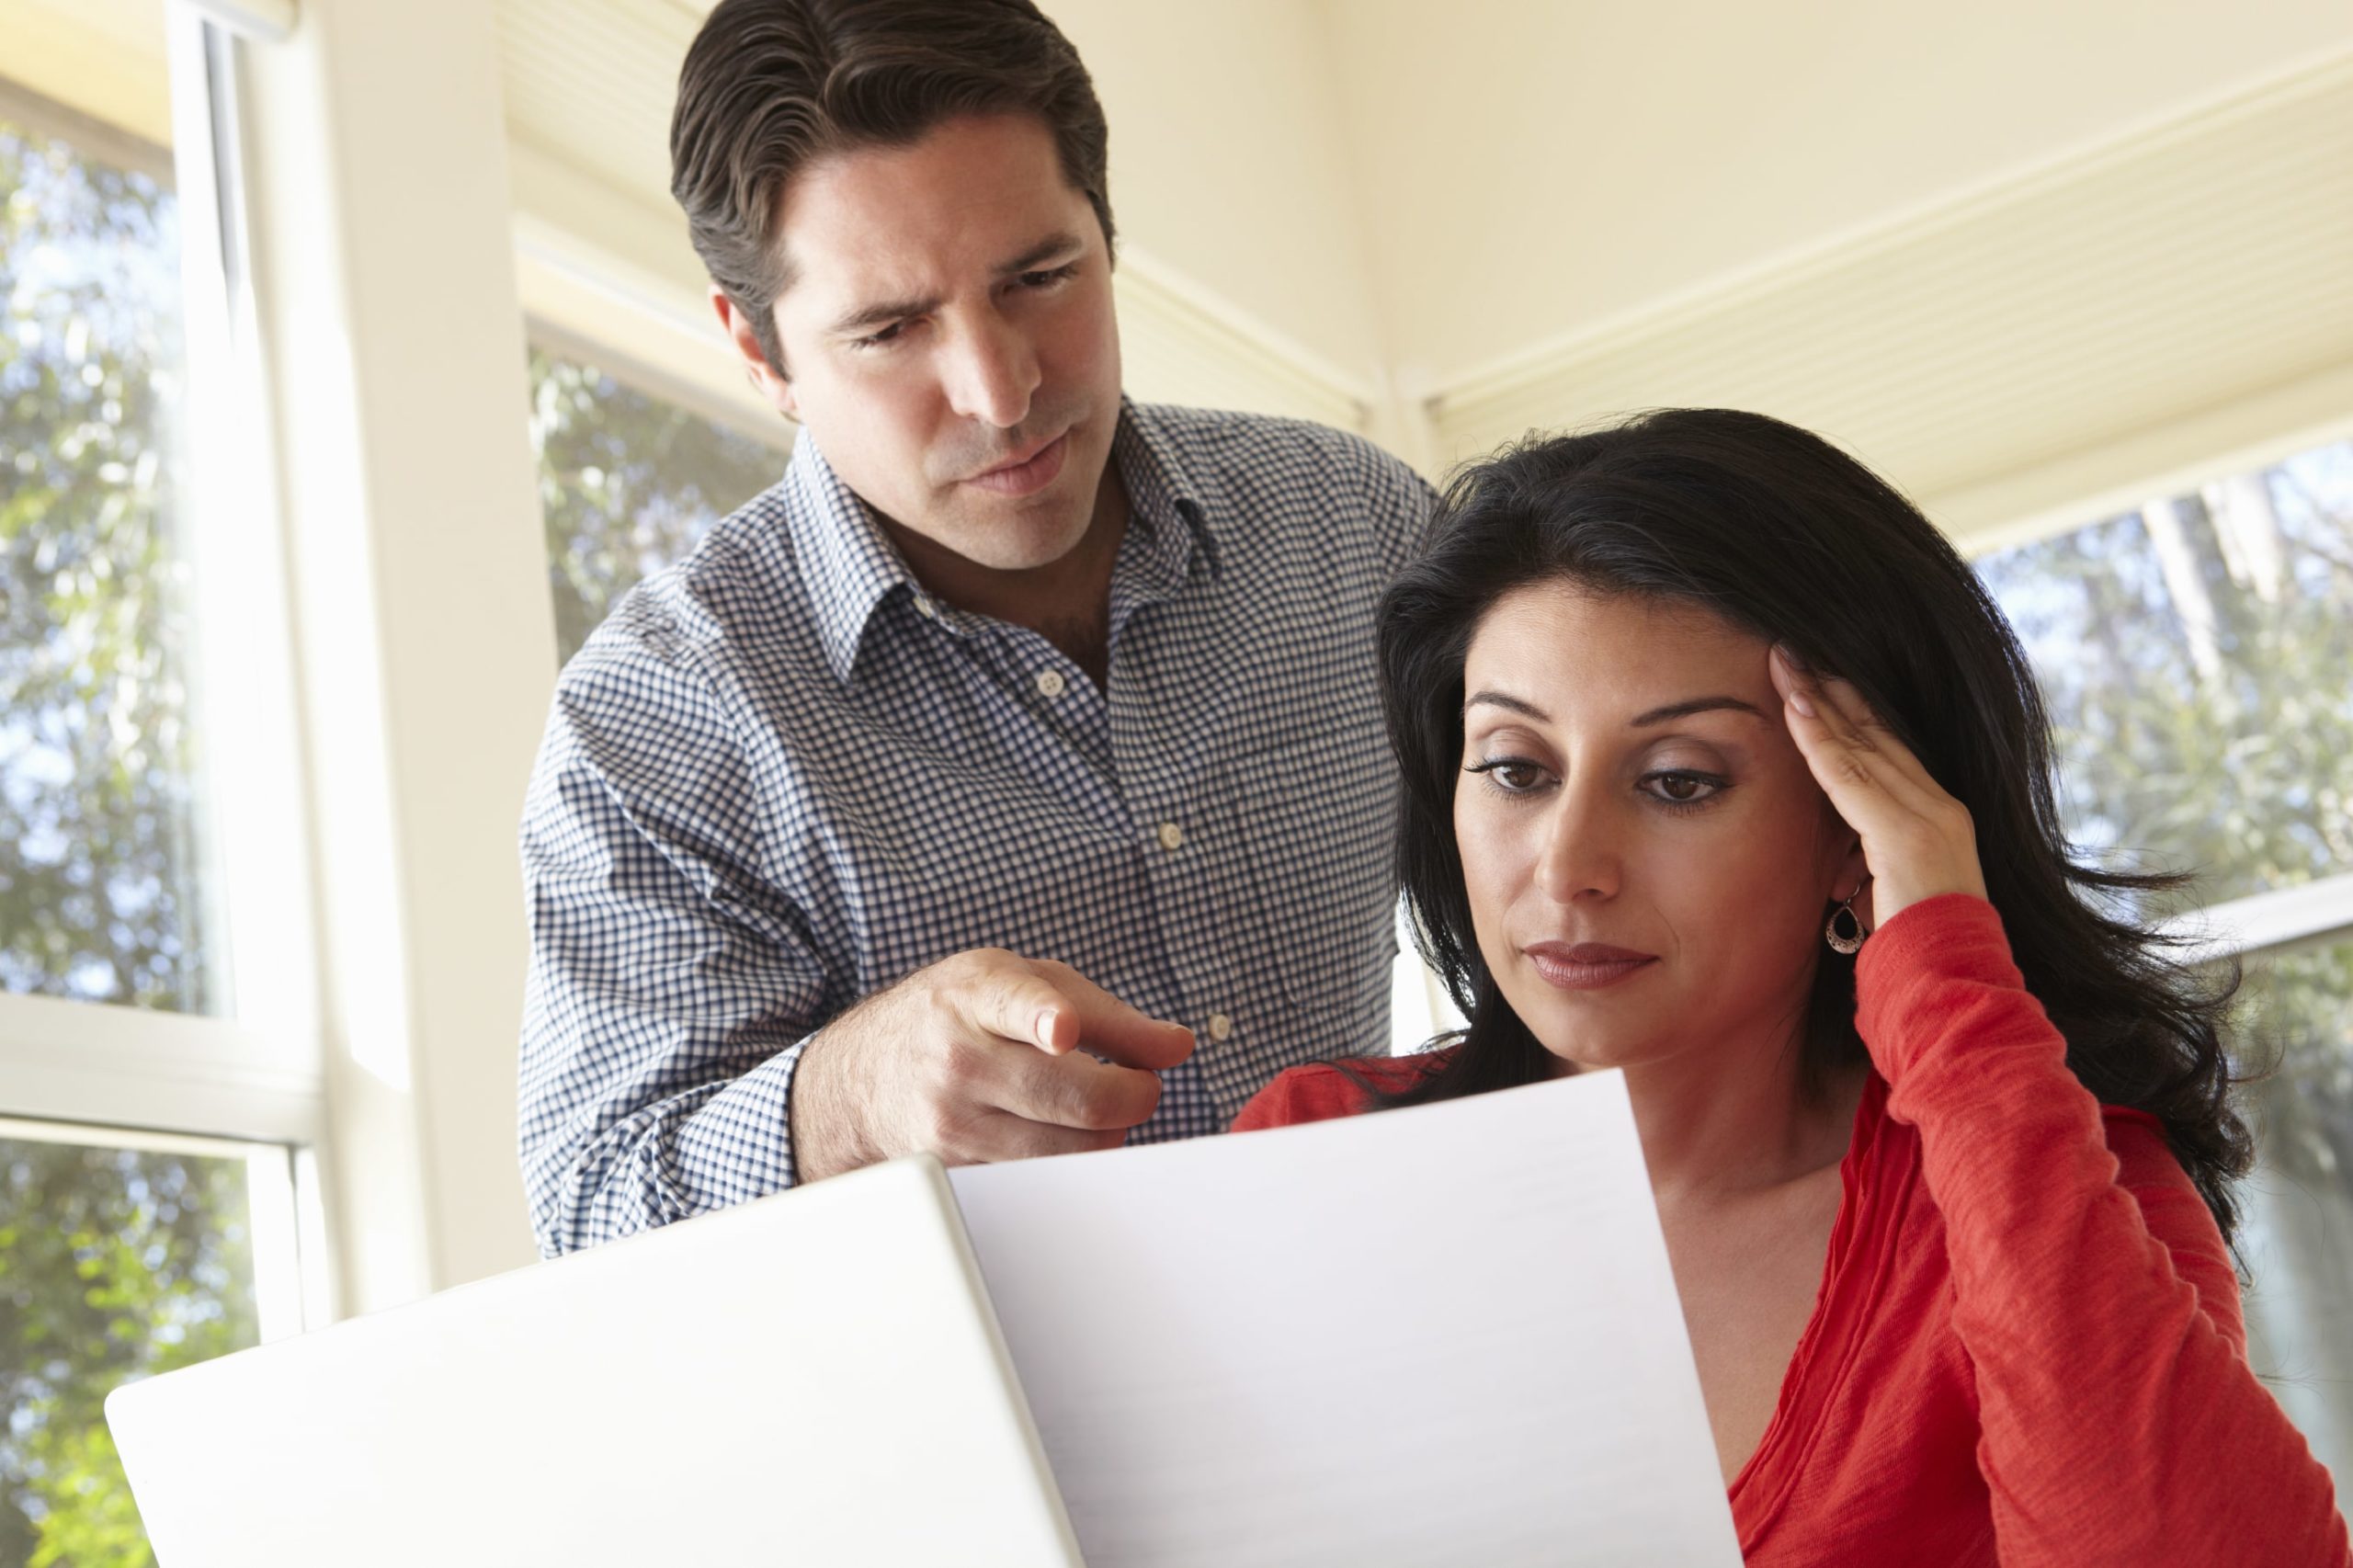 Stressed man and woman landlords looking at a document